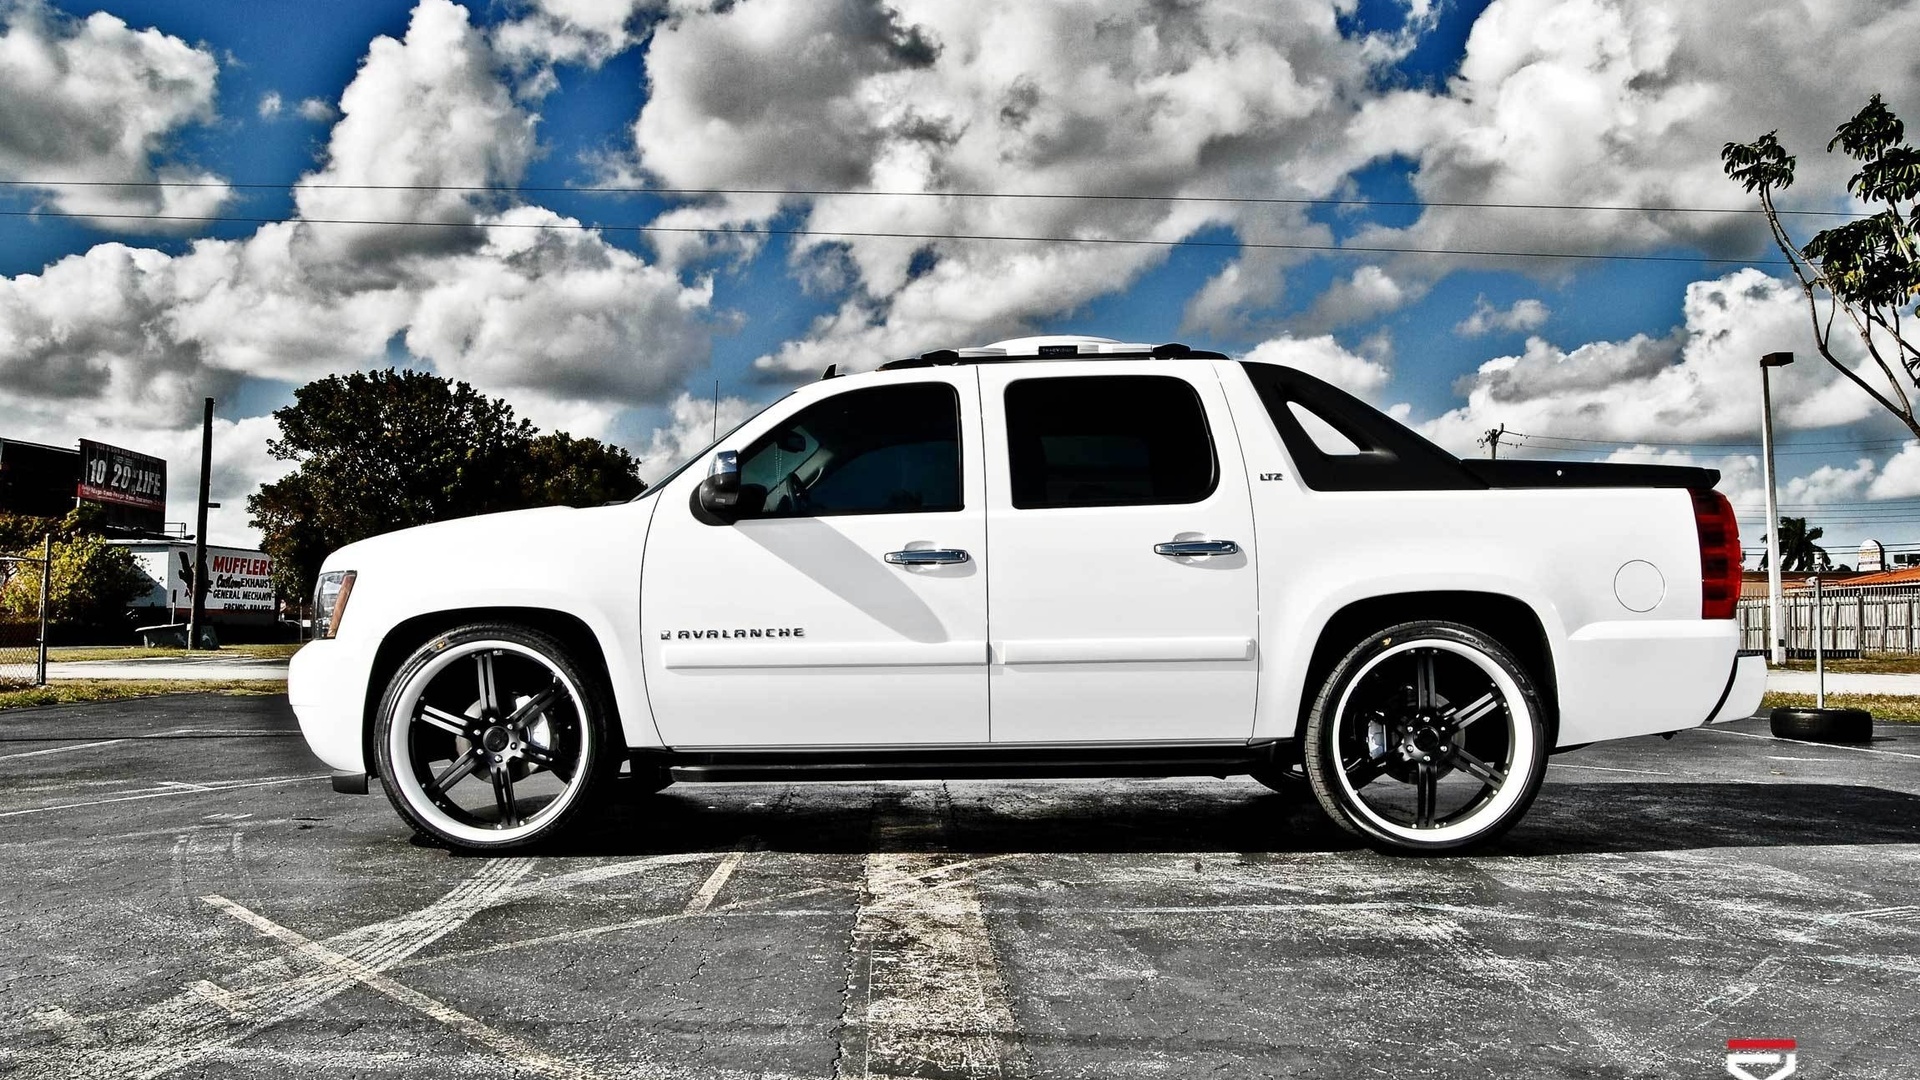 , , Chevrolet, hdr, , avalanche, 